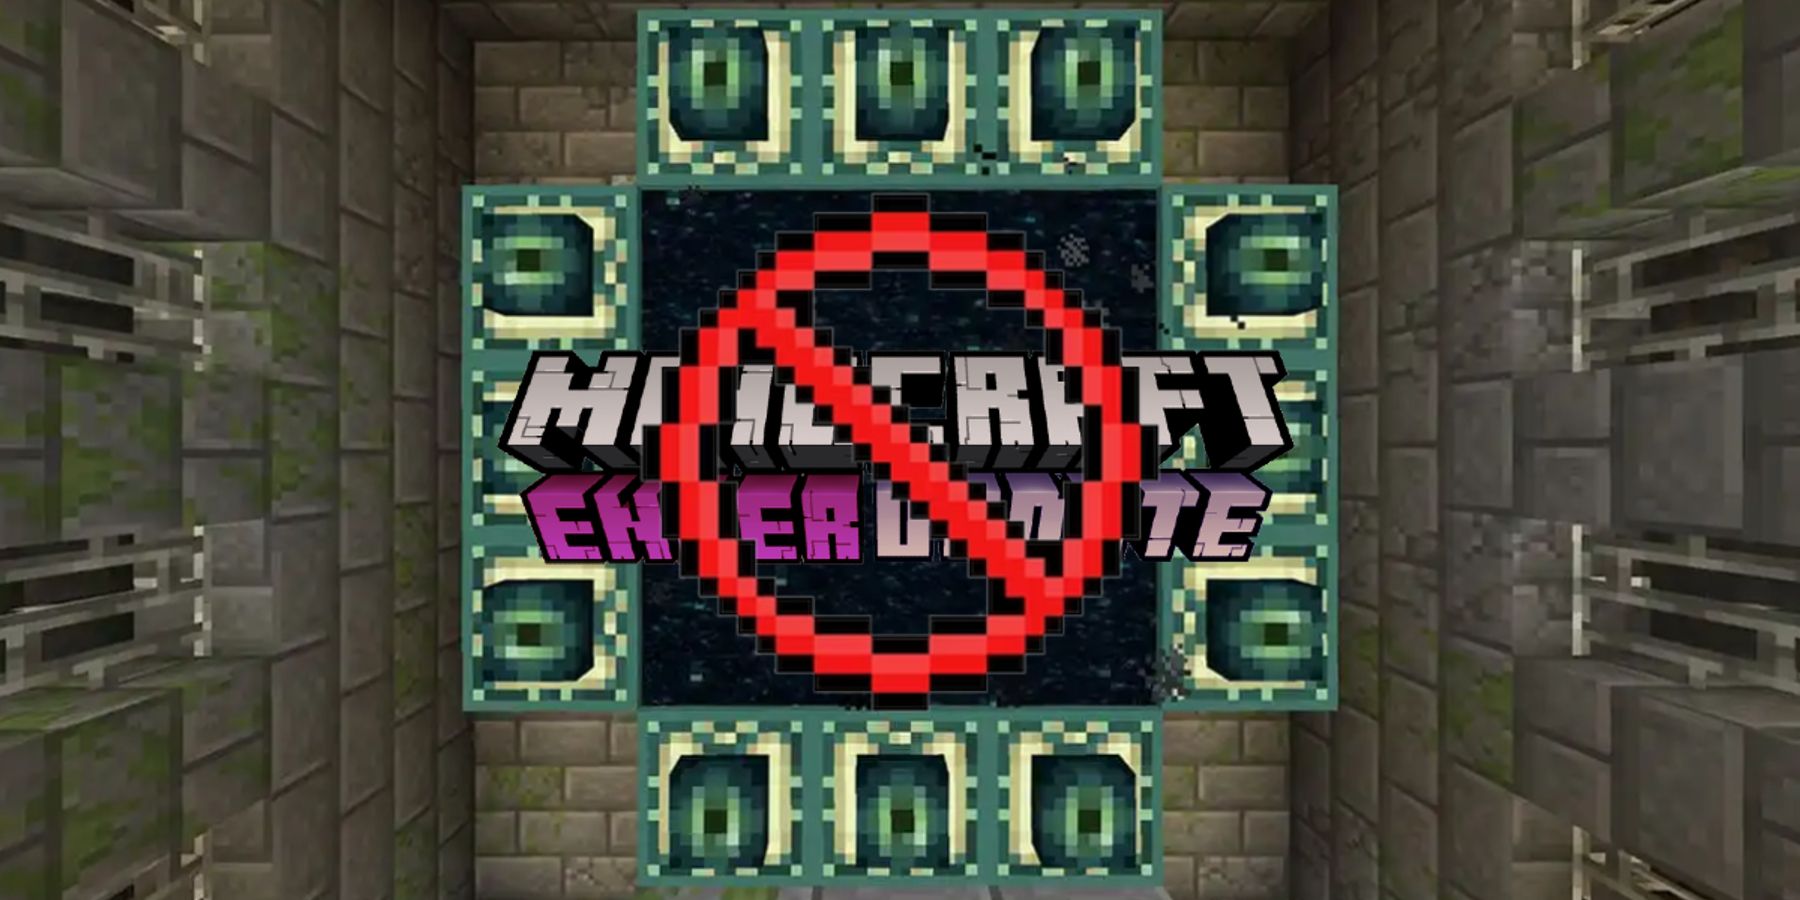 Does The End Dimension In Minecraft Deserve An Update?